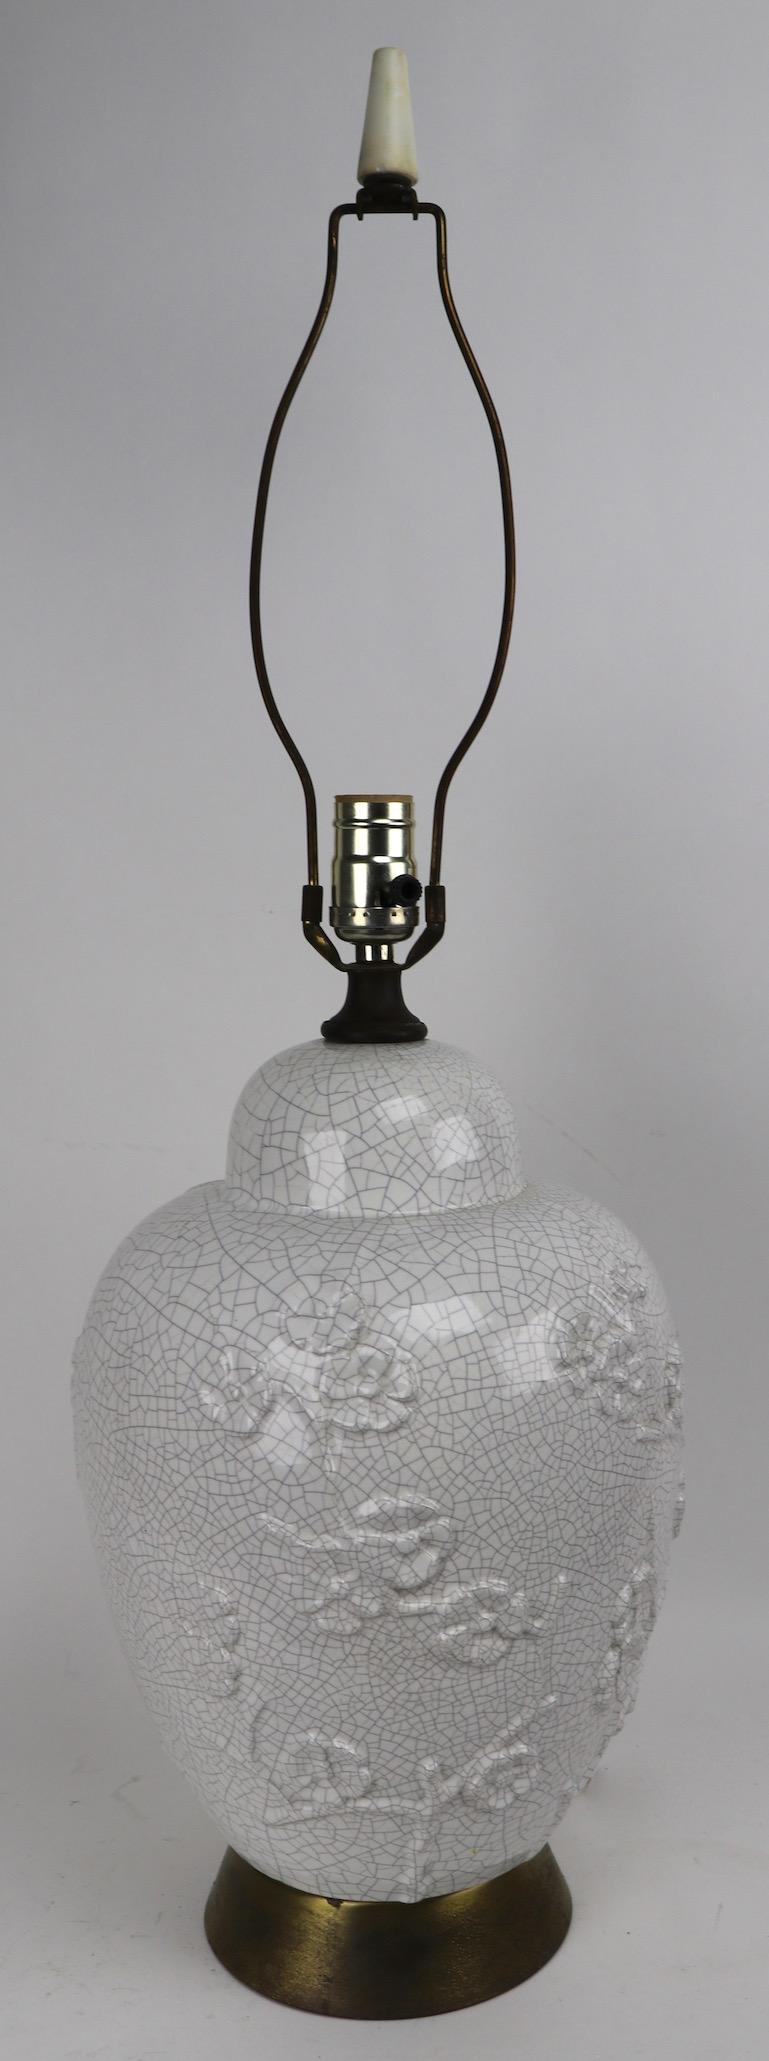 Stylish Blanc de Chine Craquelure glaze Chinese style table lamp. Nice vintage example in clean, original and working condition, shade not included. Height to top of socket 19 inches x total H 30 inches.